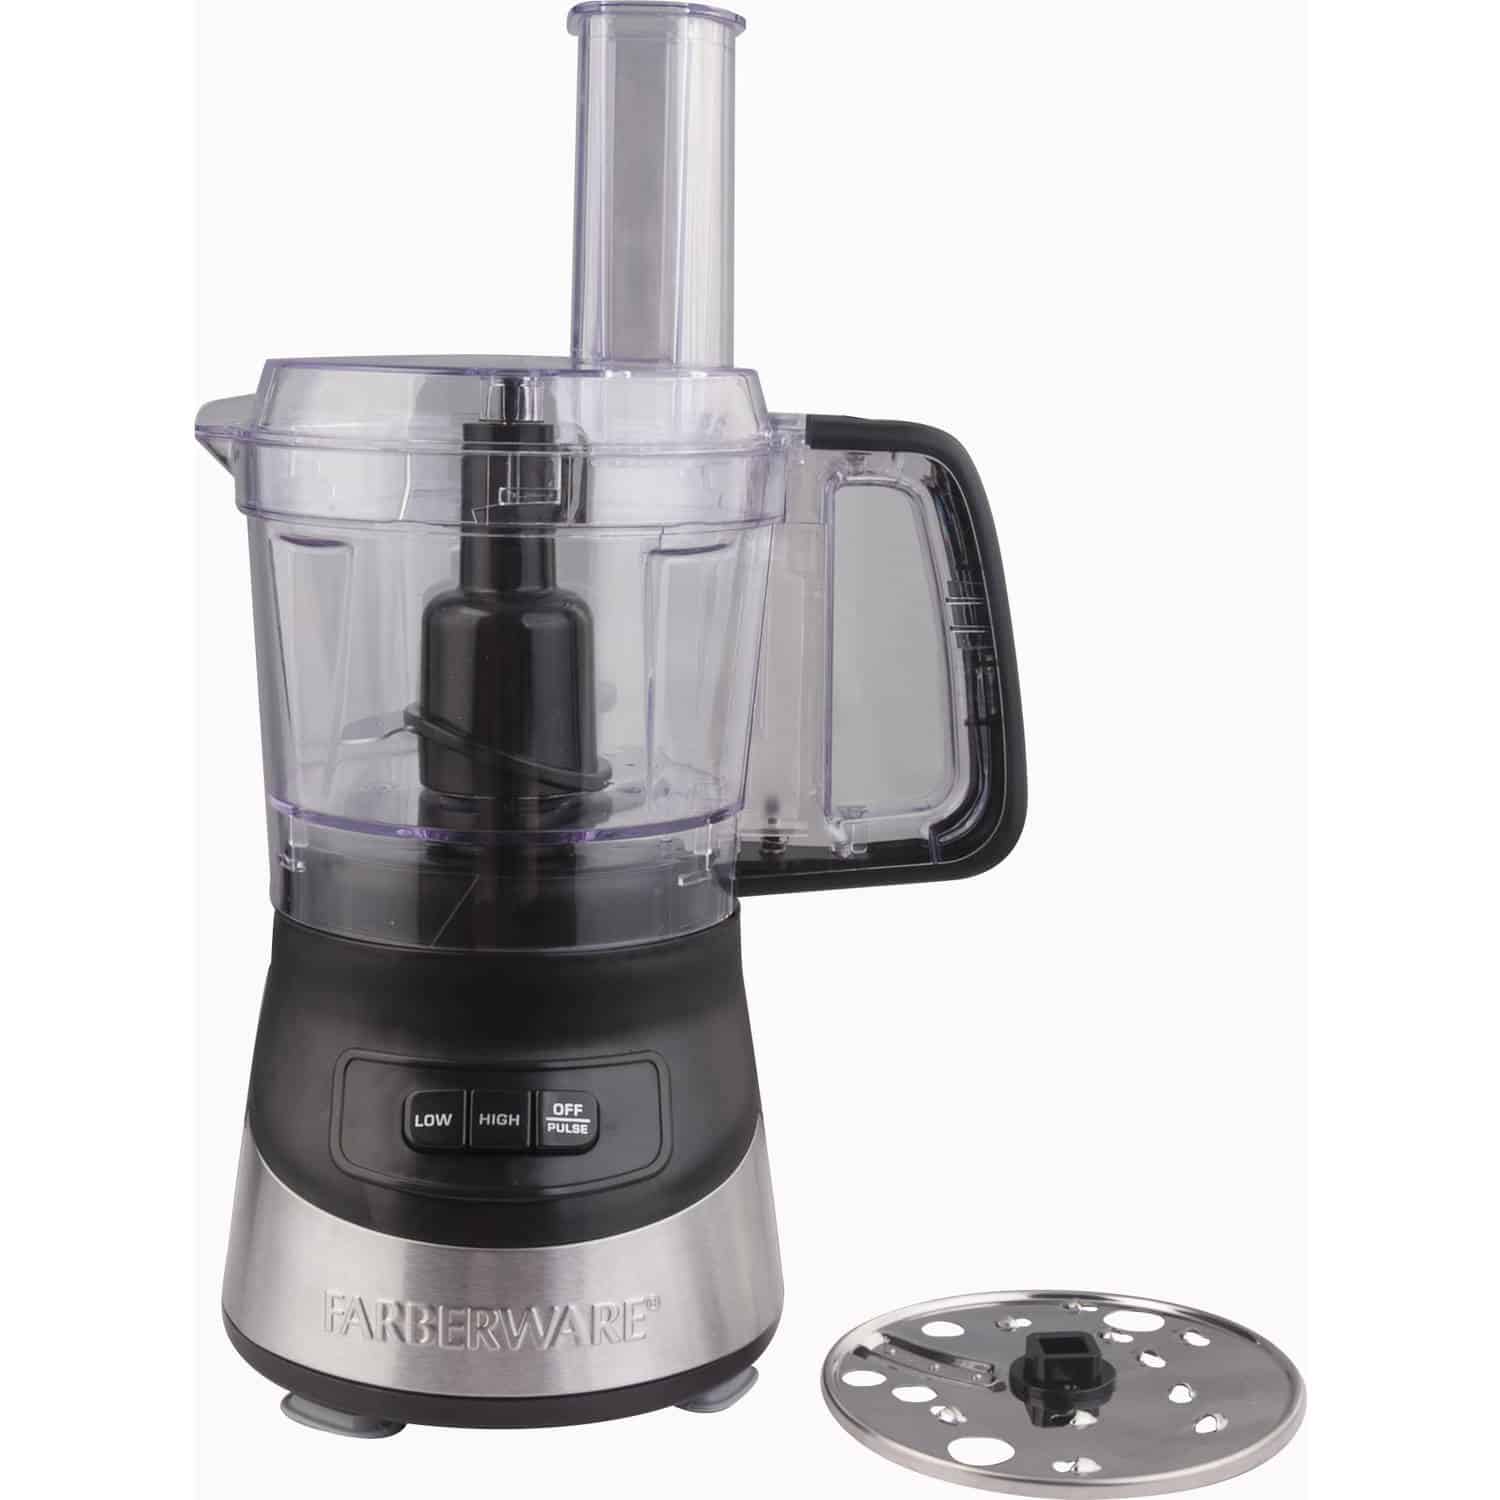 Farberware 4 Cup Food Processor with Stainless Steel Blade - Walmart.com